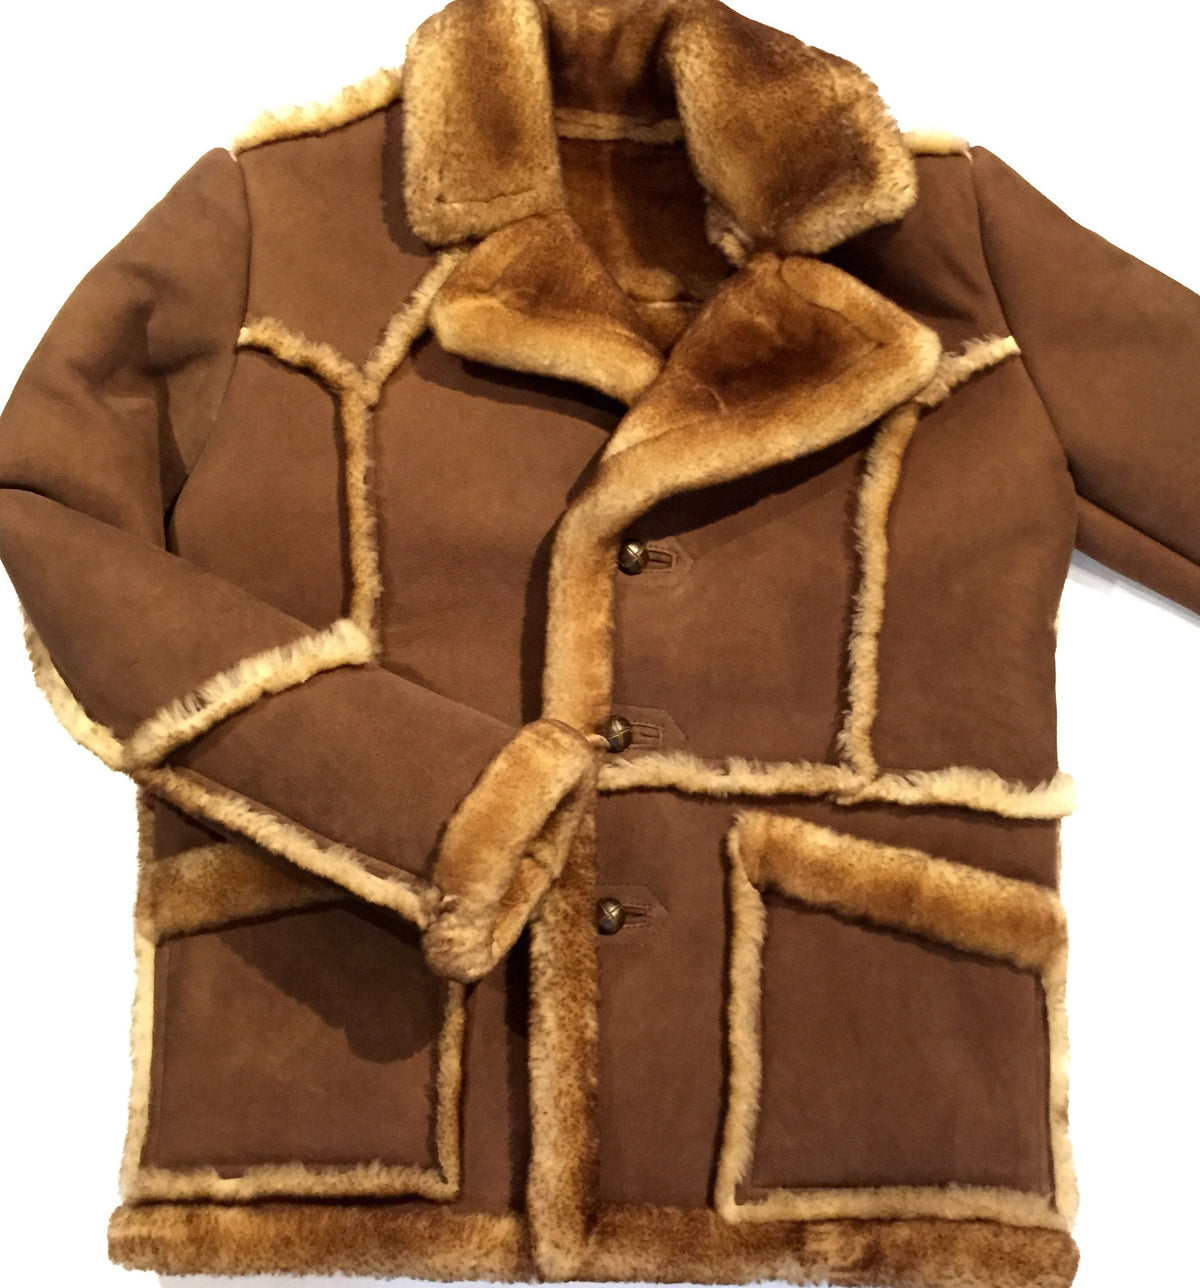 Jakewood "Fluff" Shearling Jacket w/ Buttons - Dudes Boutique